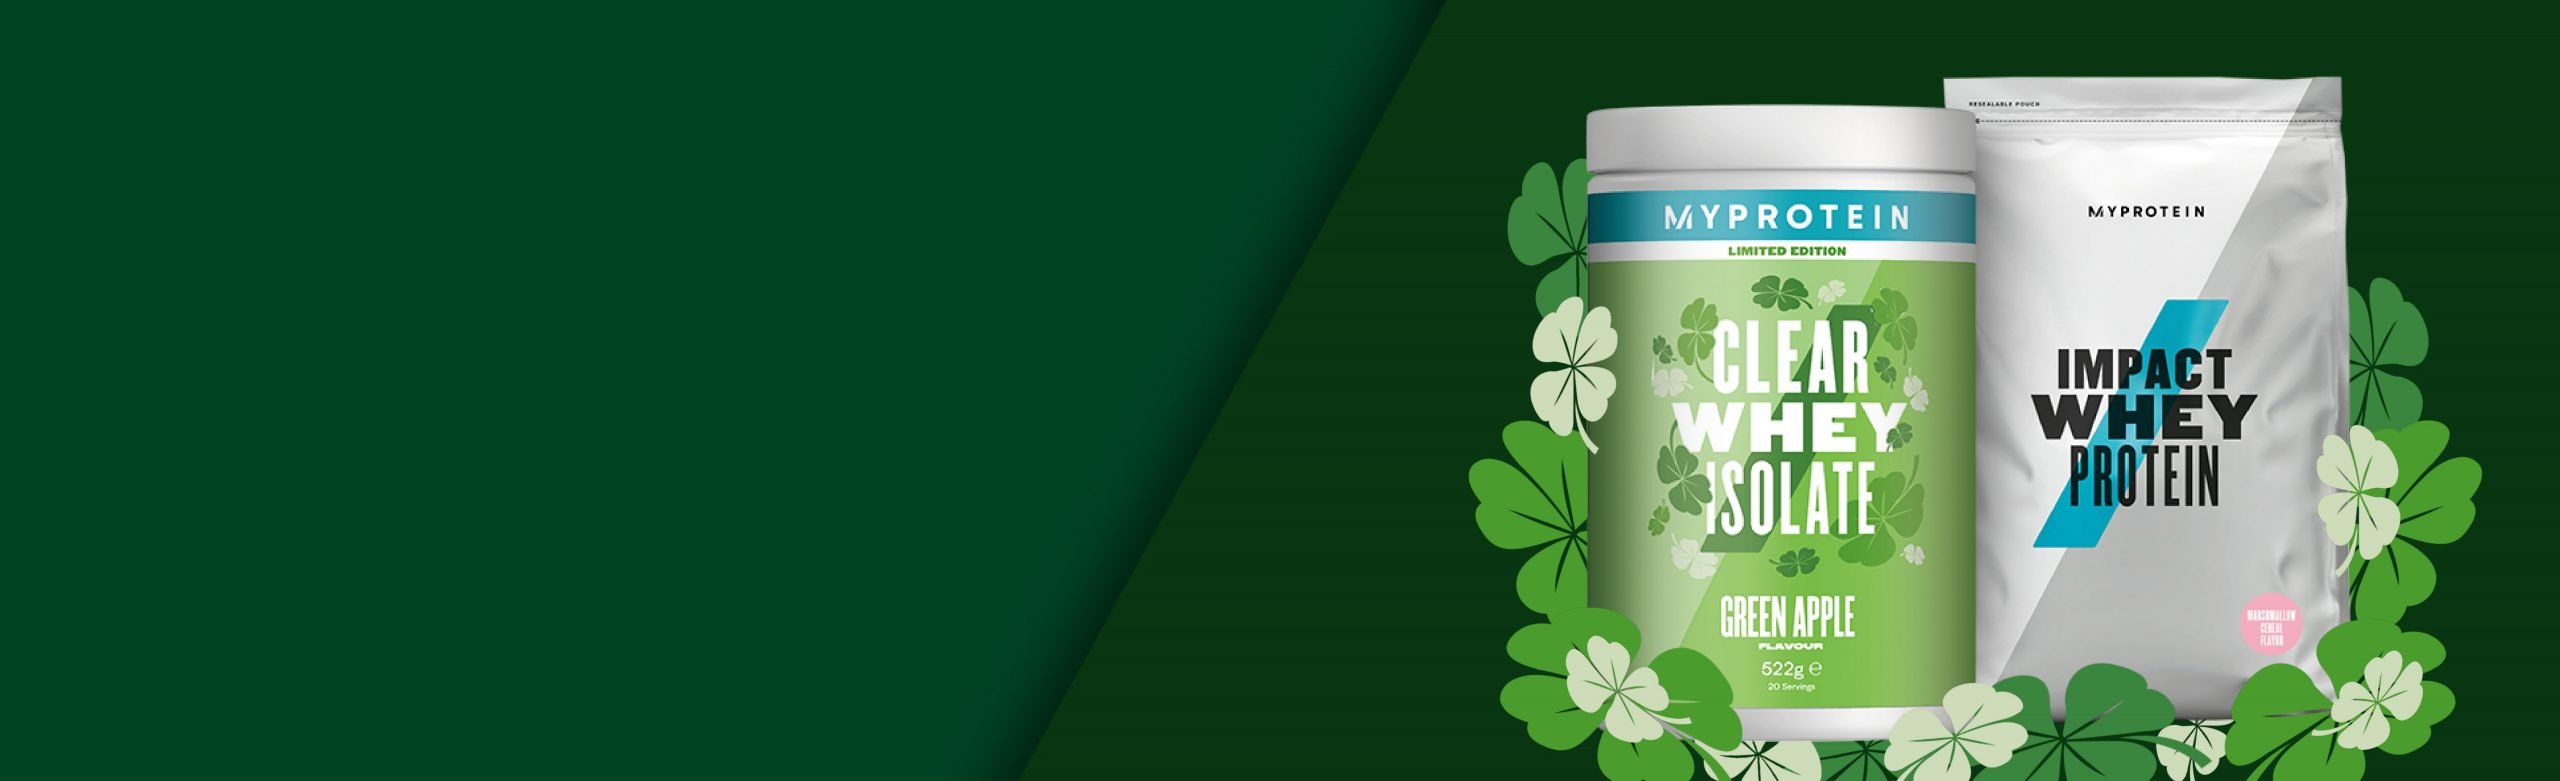 Celebrate St. Patrick’s Day With An All New Flavor Of Clear Whey Isolate